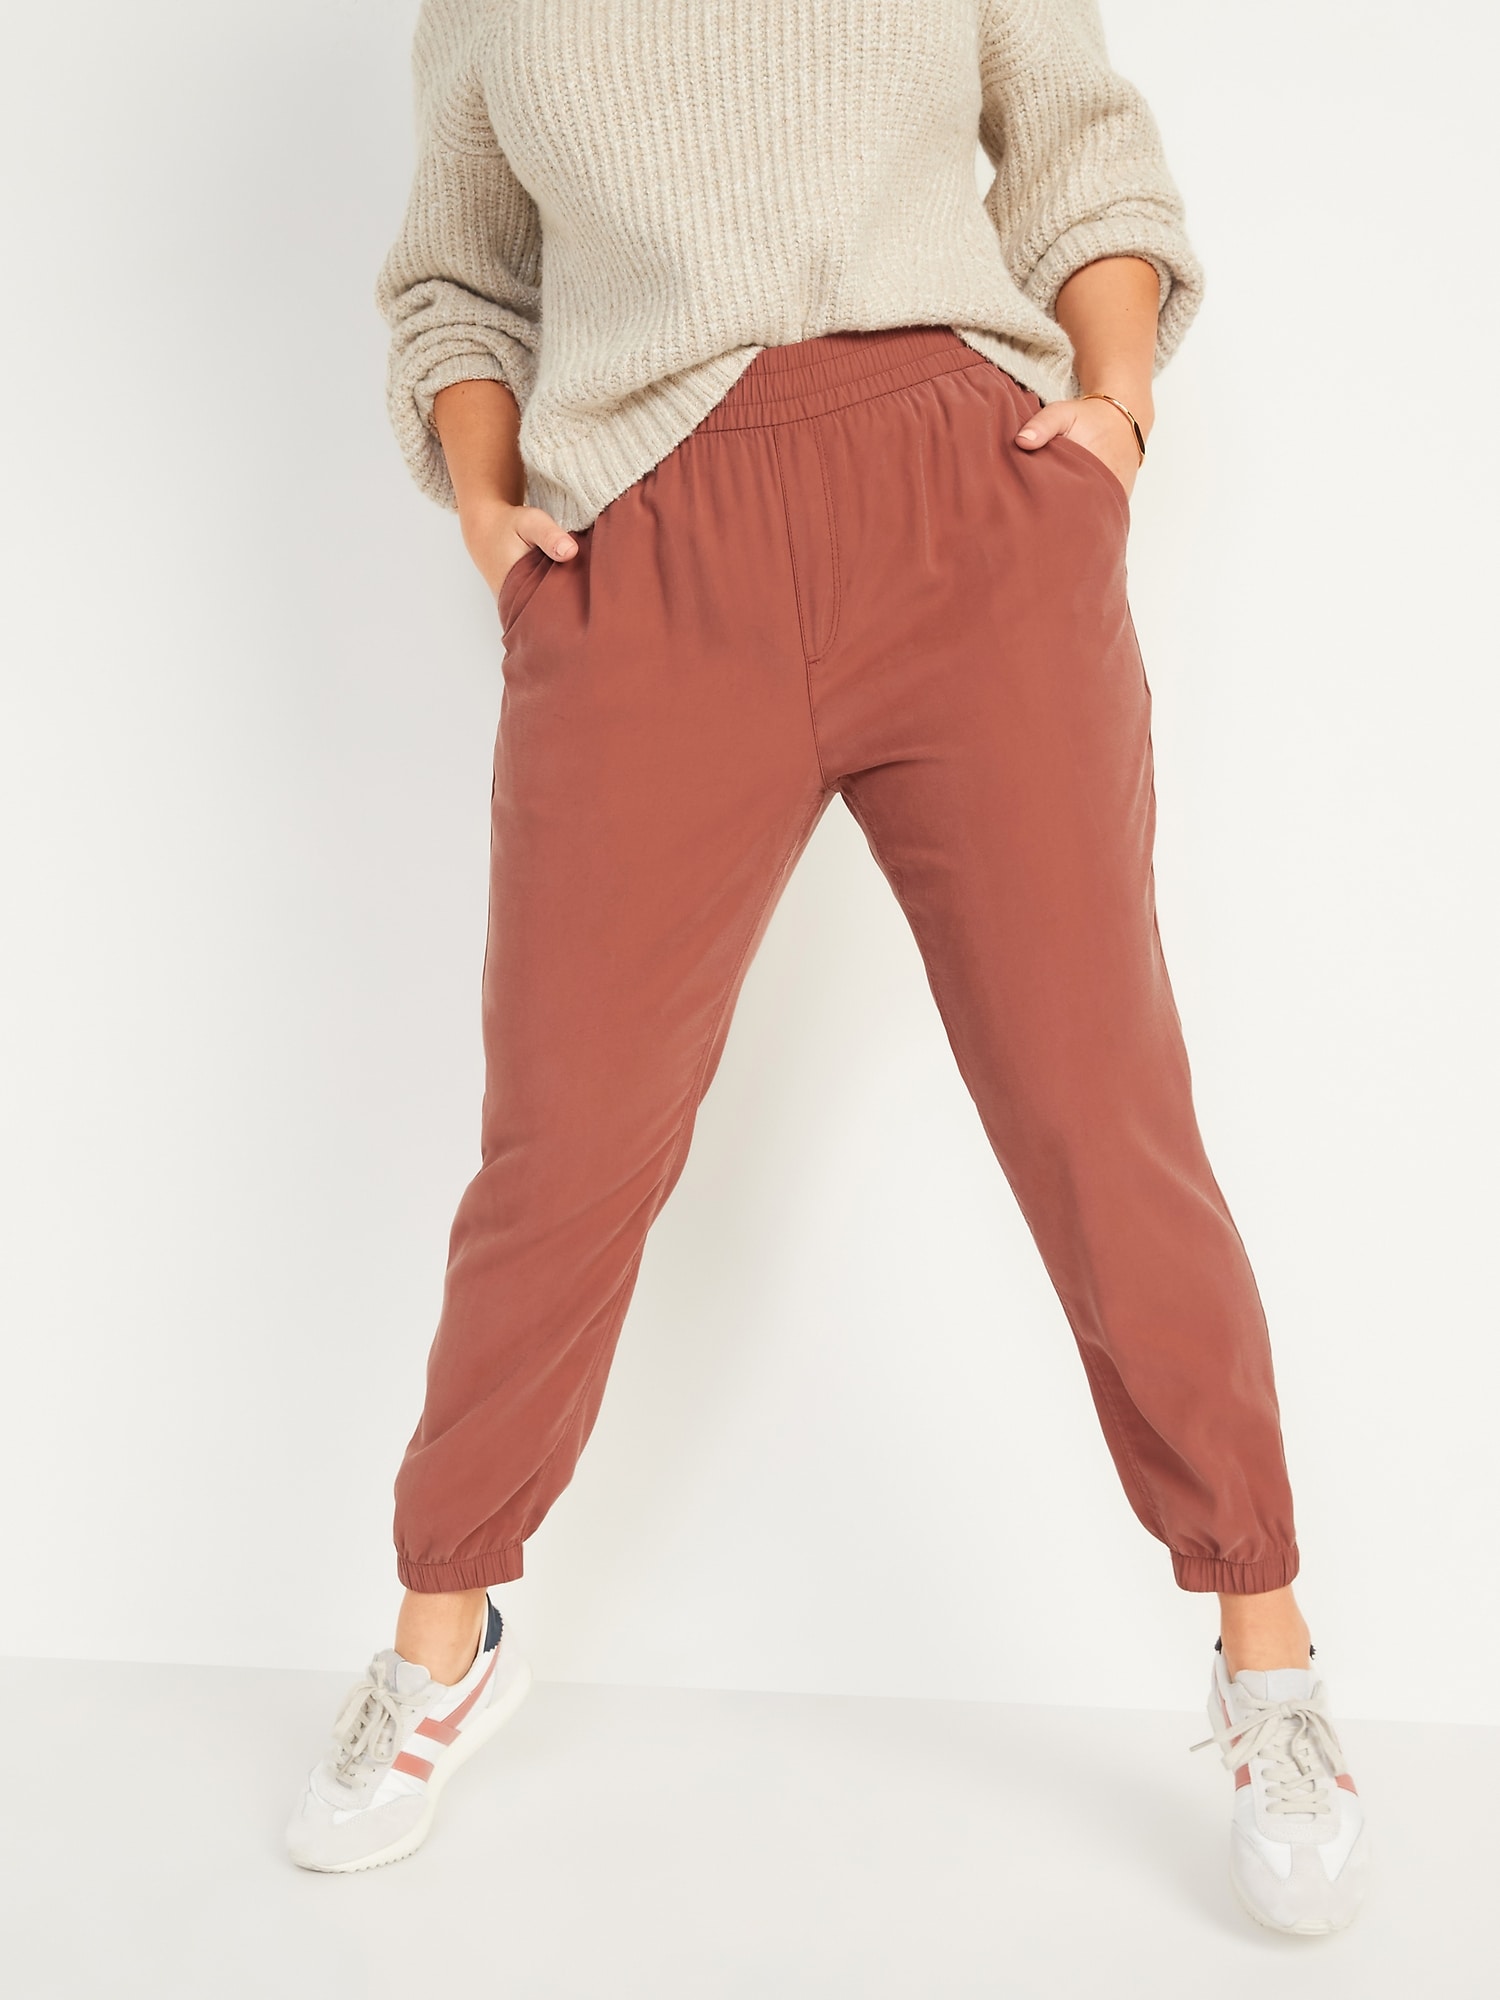 Old Navy, Pants & Jumpsuits, Old Navy Dateline Highwaisted Twill Jogger  Pants Mauve